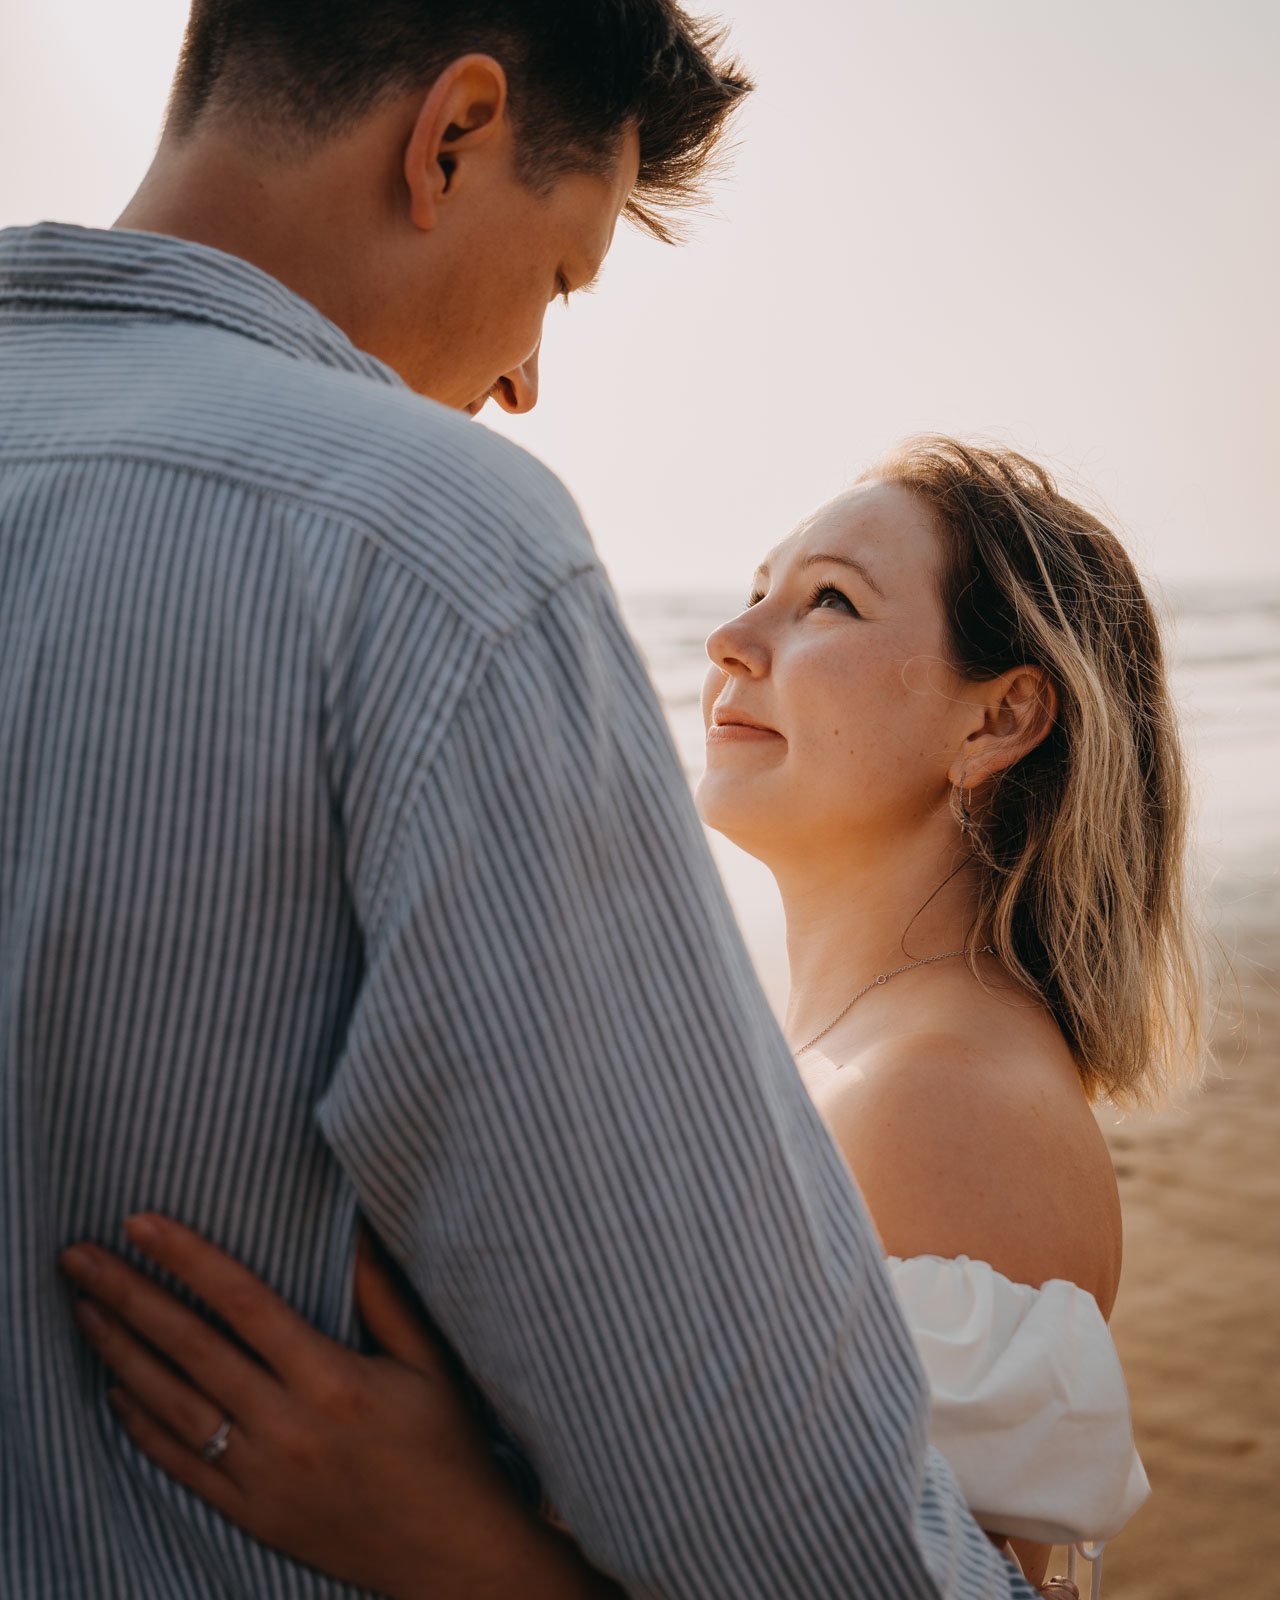 Engagement photoshoot on the beach